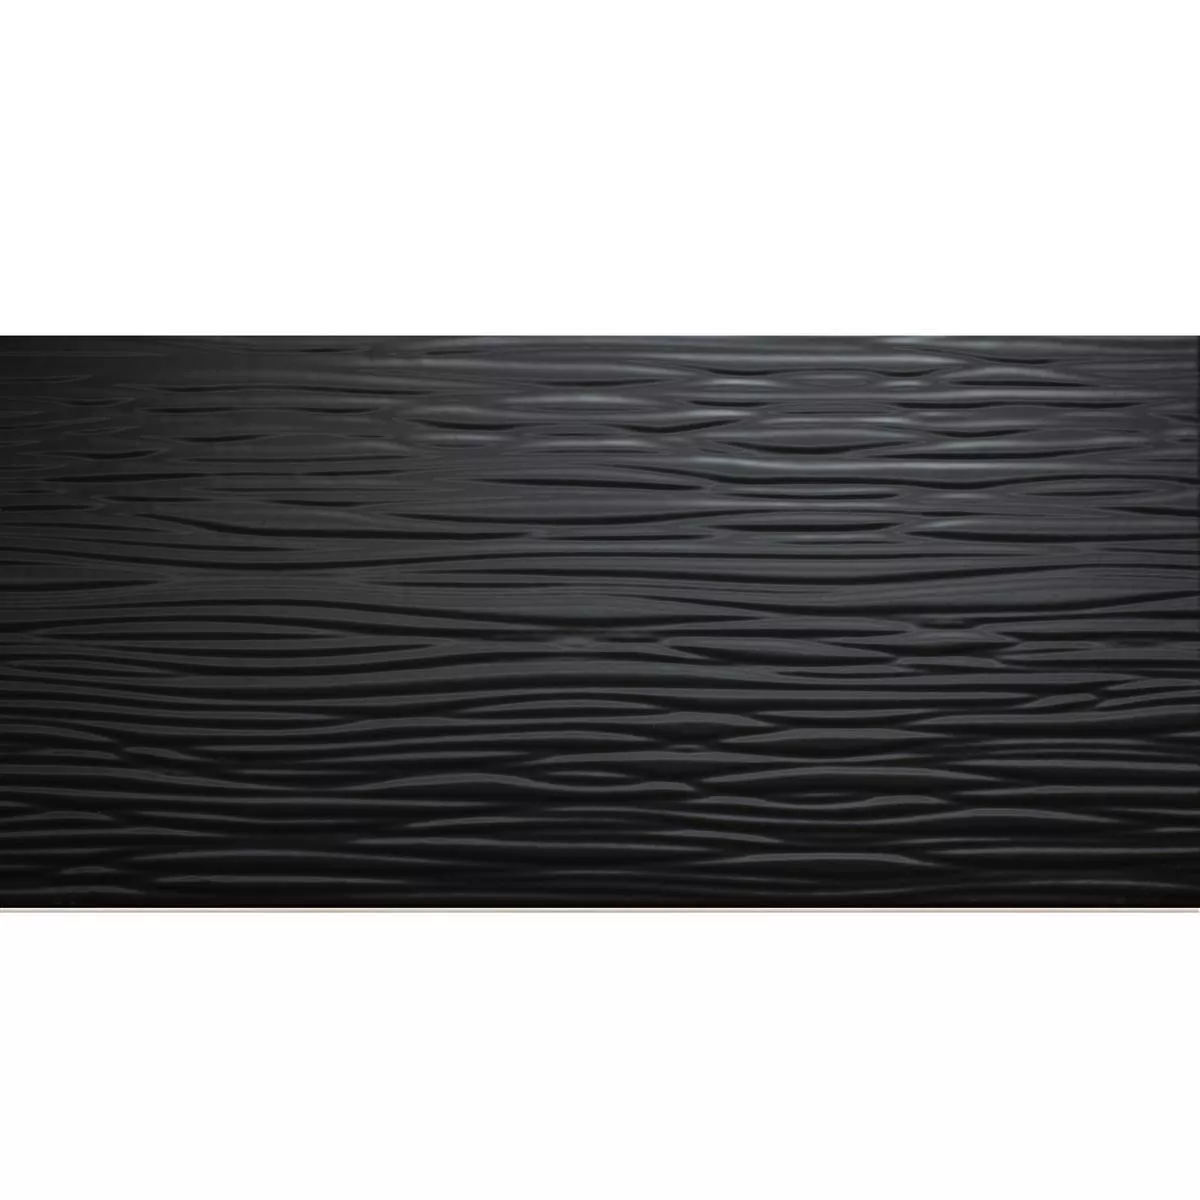 Sample Wall Tiles Norway Structured Glossy 25x50cm Black